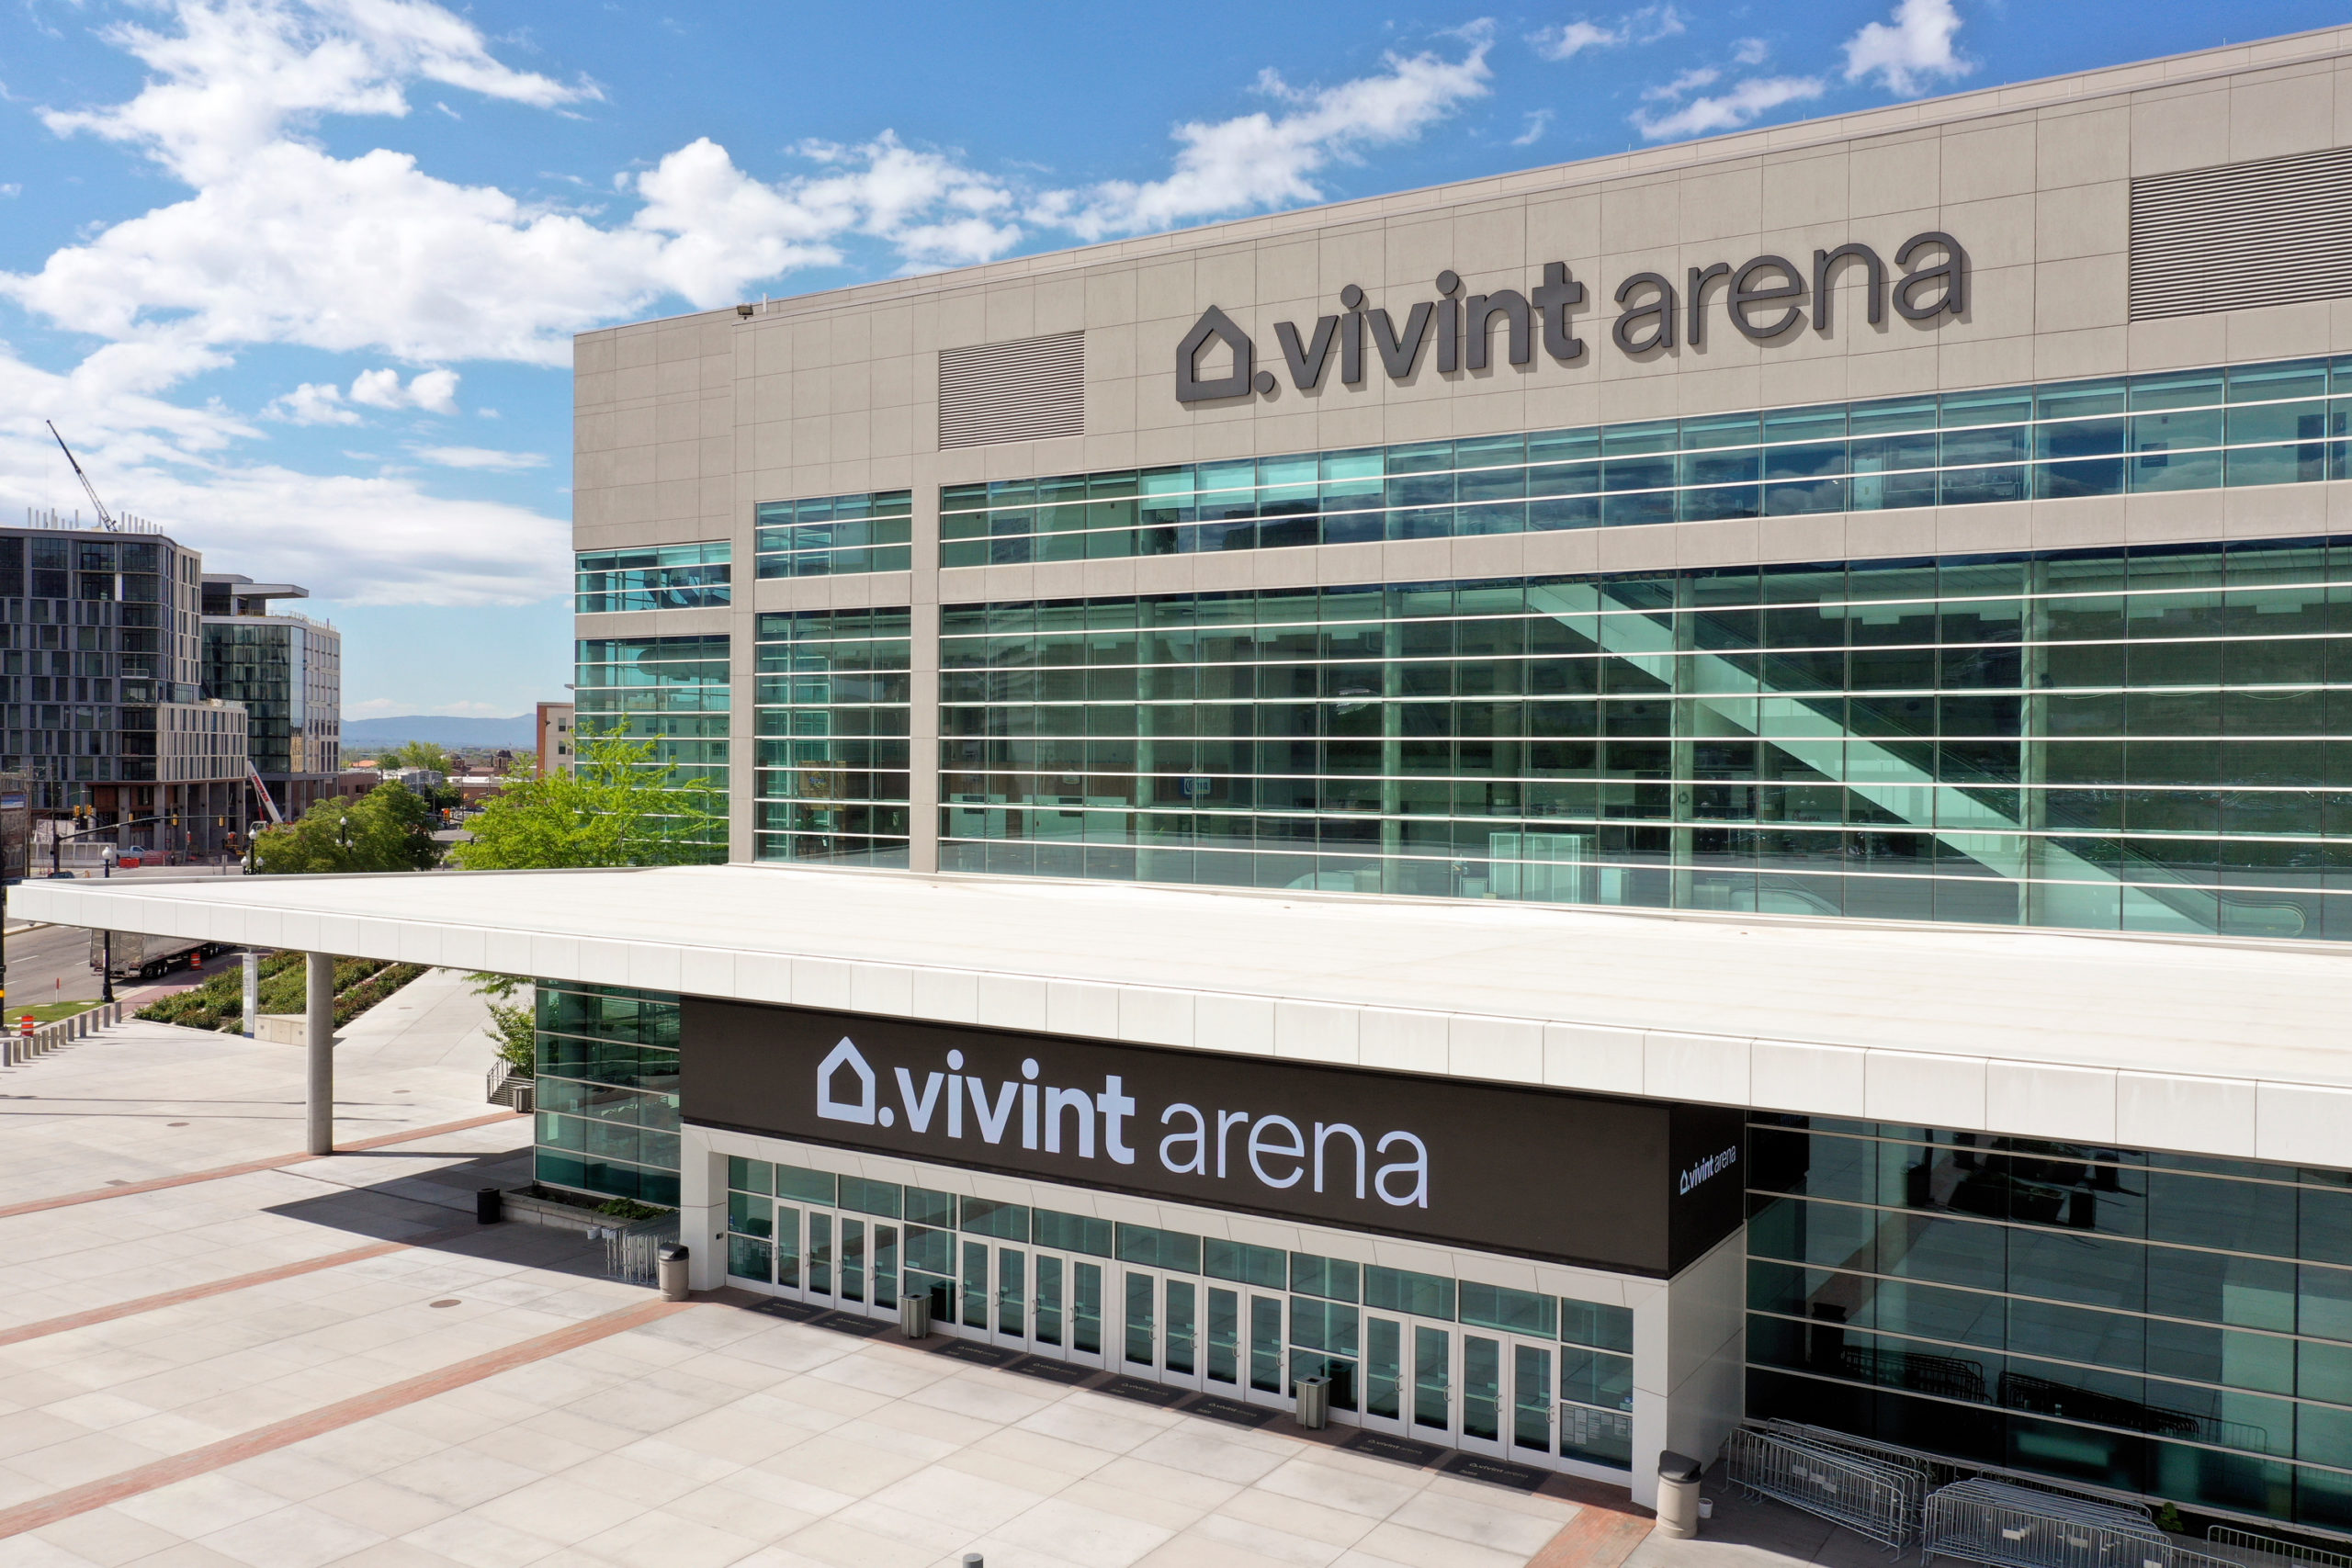 The Vivint Arena in Salt Lake City is pictured on Tuesday, May 24, 2022. (Kristin Murphy, Deseret N...